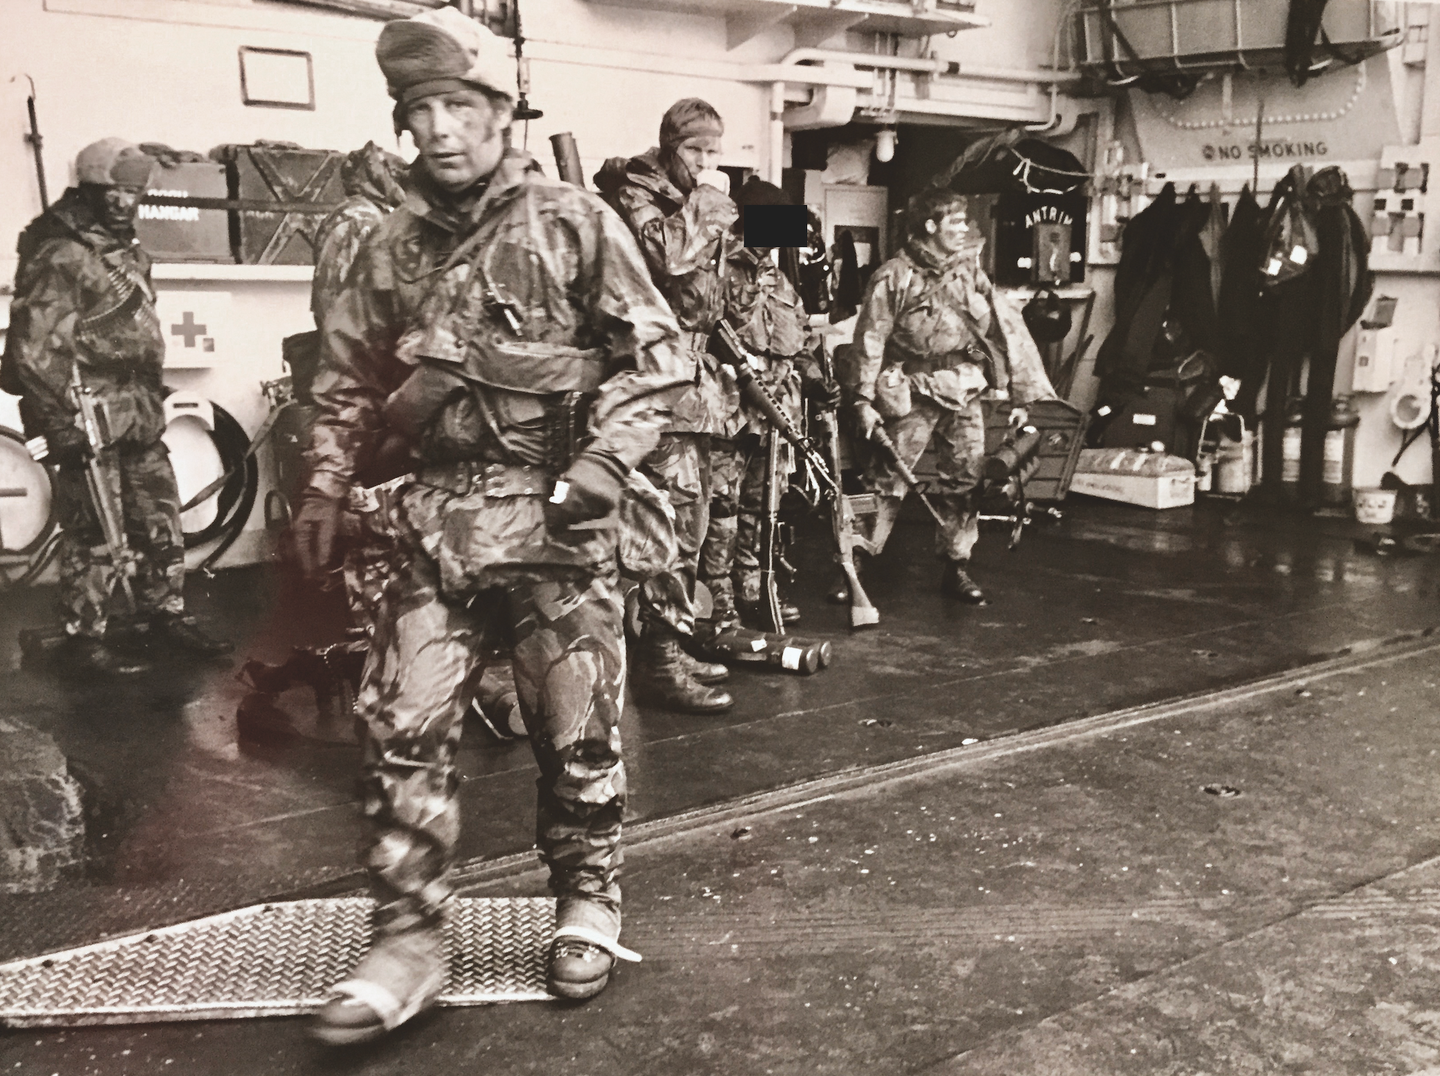 Onboard HMS <em>Antrim</em> shortly before launching the raid on Pebble Island. Splash is on the very left of the picture, with an AR-15 assault rifle in his right hand. Note the non-standard boots worn by the trooper in the foreground. <em>NA</em>